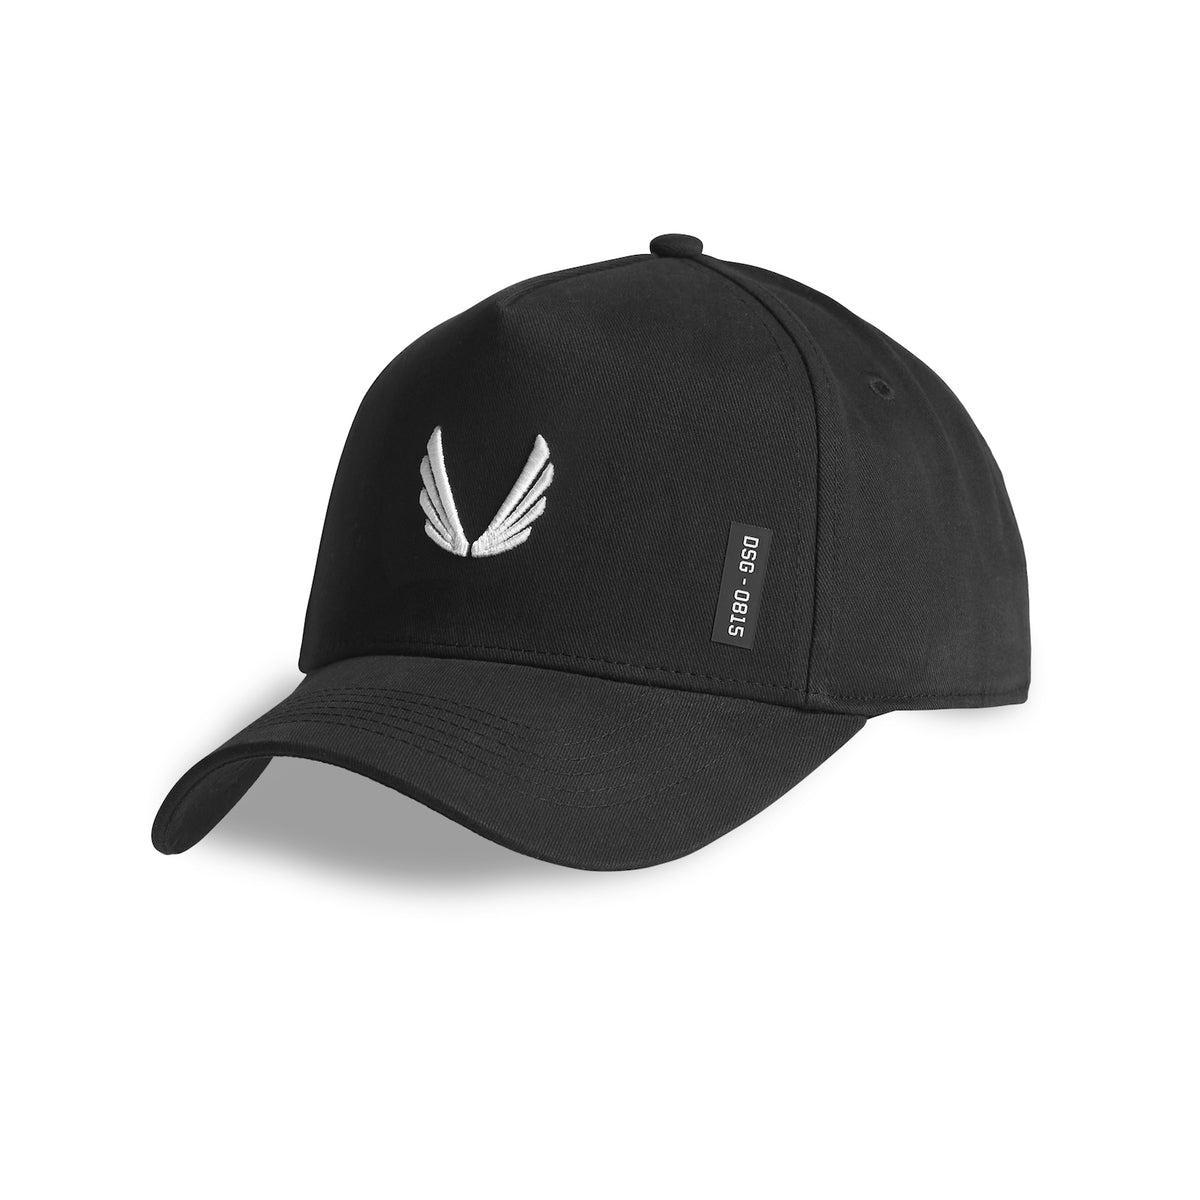 0815. A-Frame Hat - Black/Black "Wings" Product Image